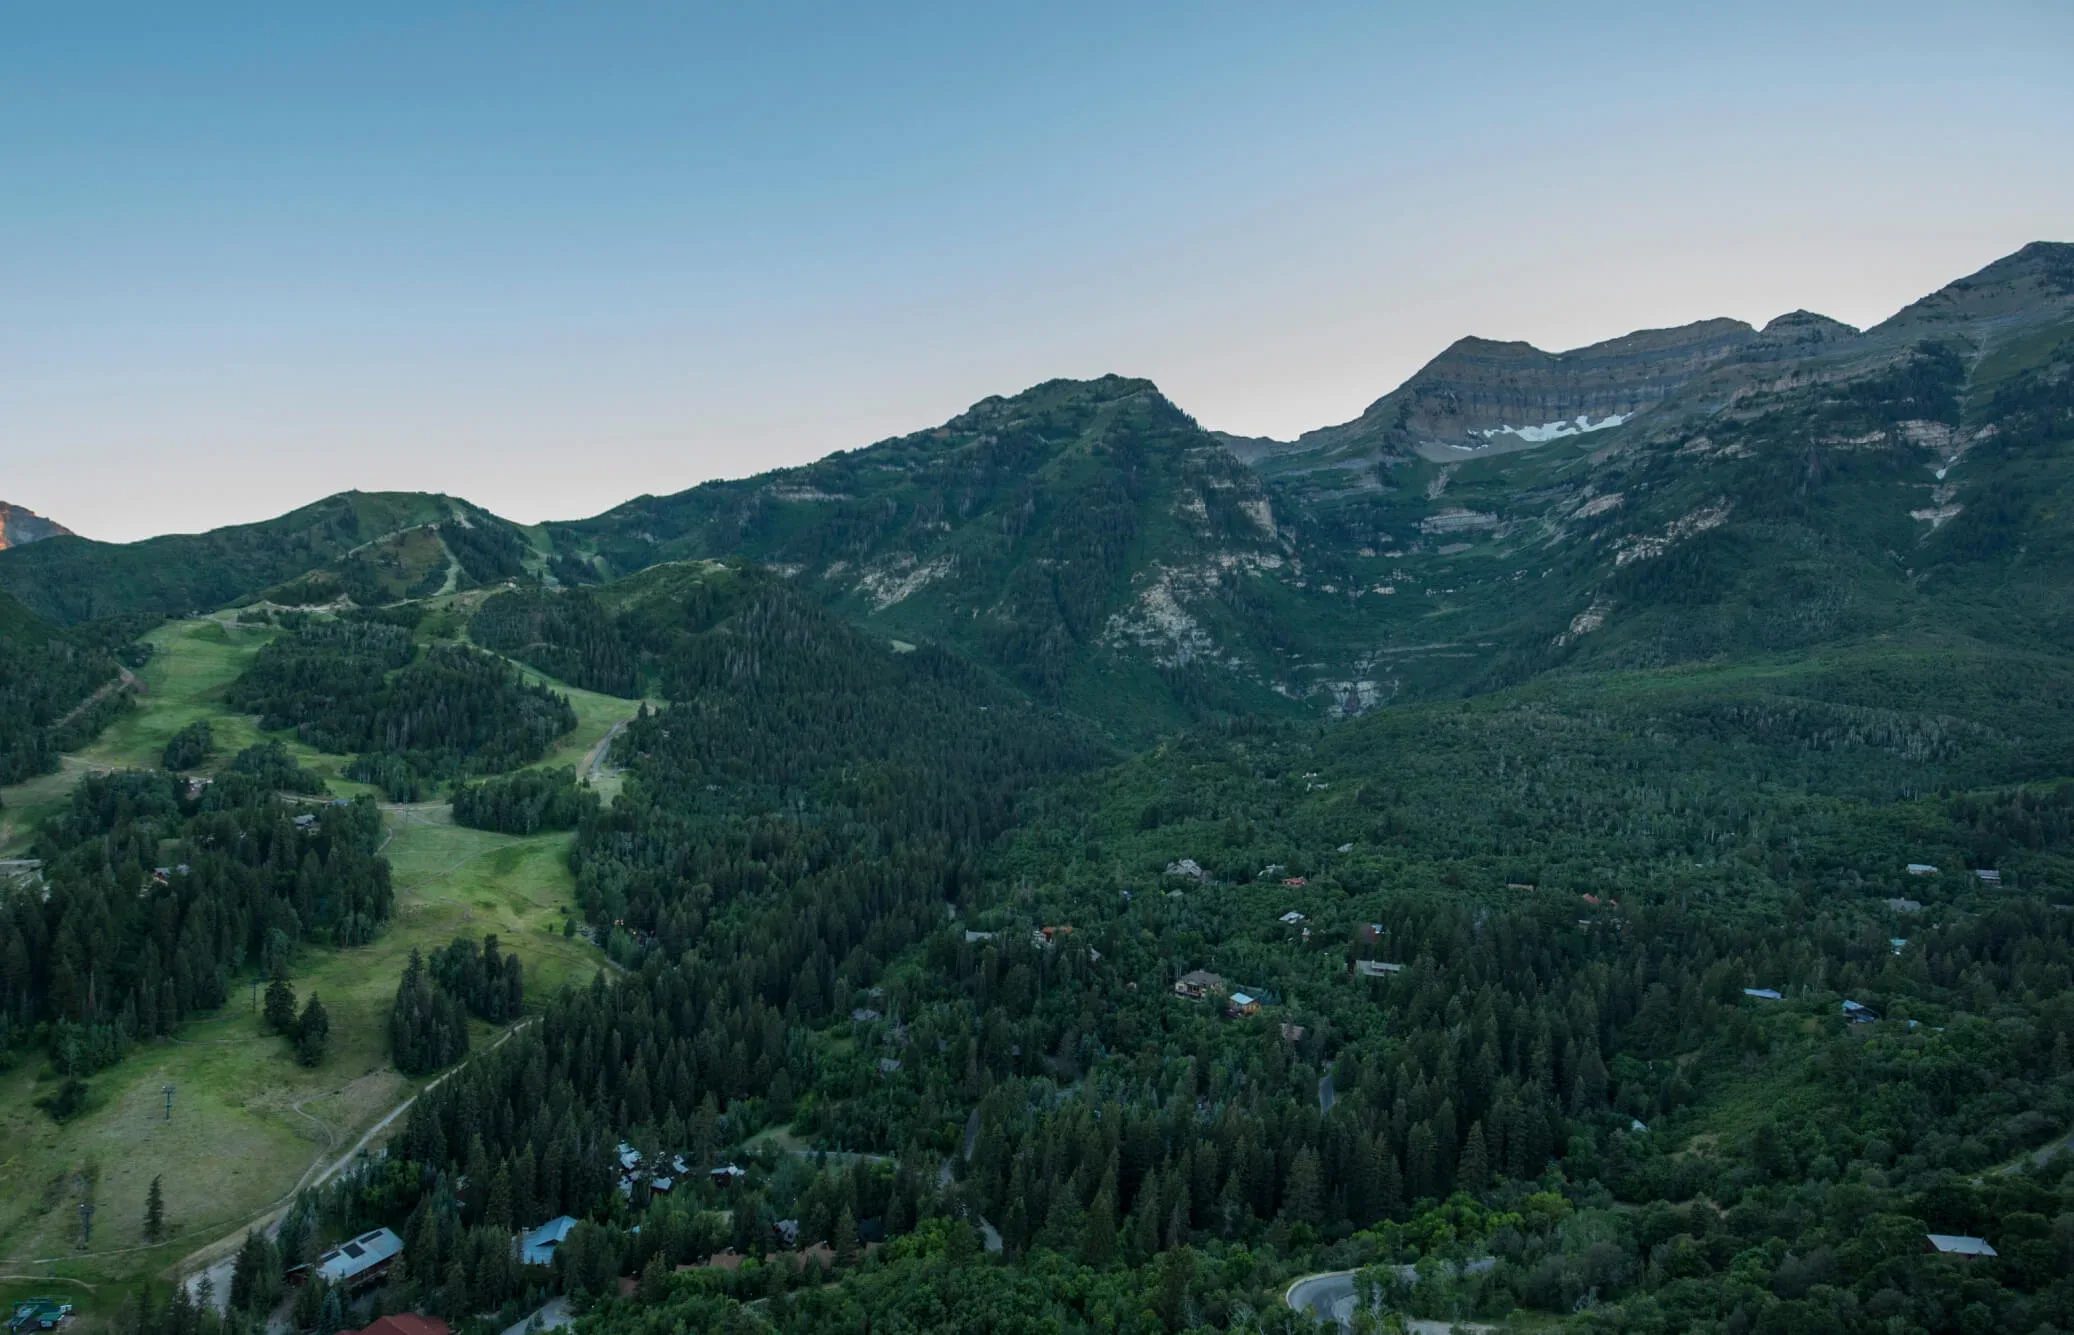 A lush green valley surrounded by forested mountains under a clear sky at dusk. Scattered houses are visible among the trees, and ski slopes and trails wind their way through the landscape, leading up to the mountain peaks.